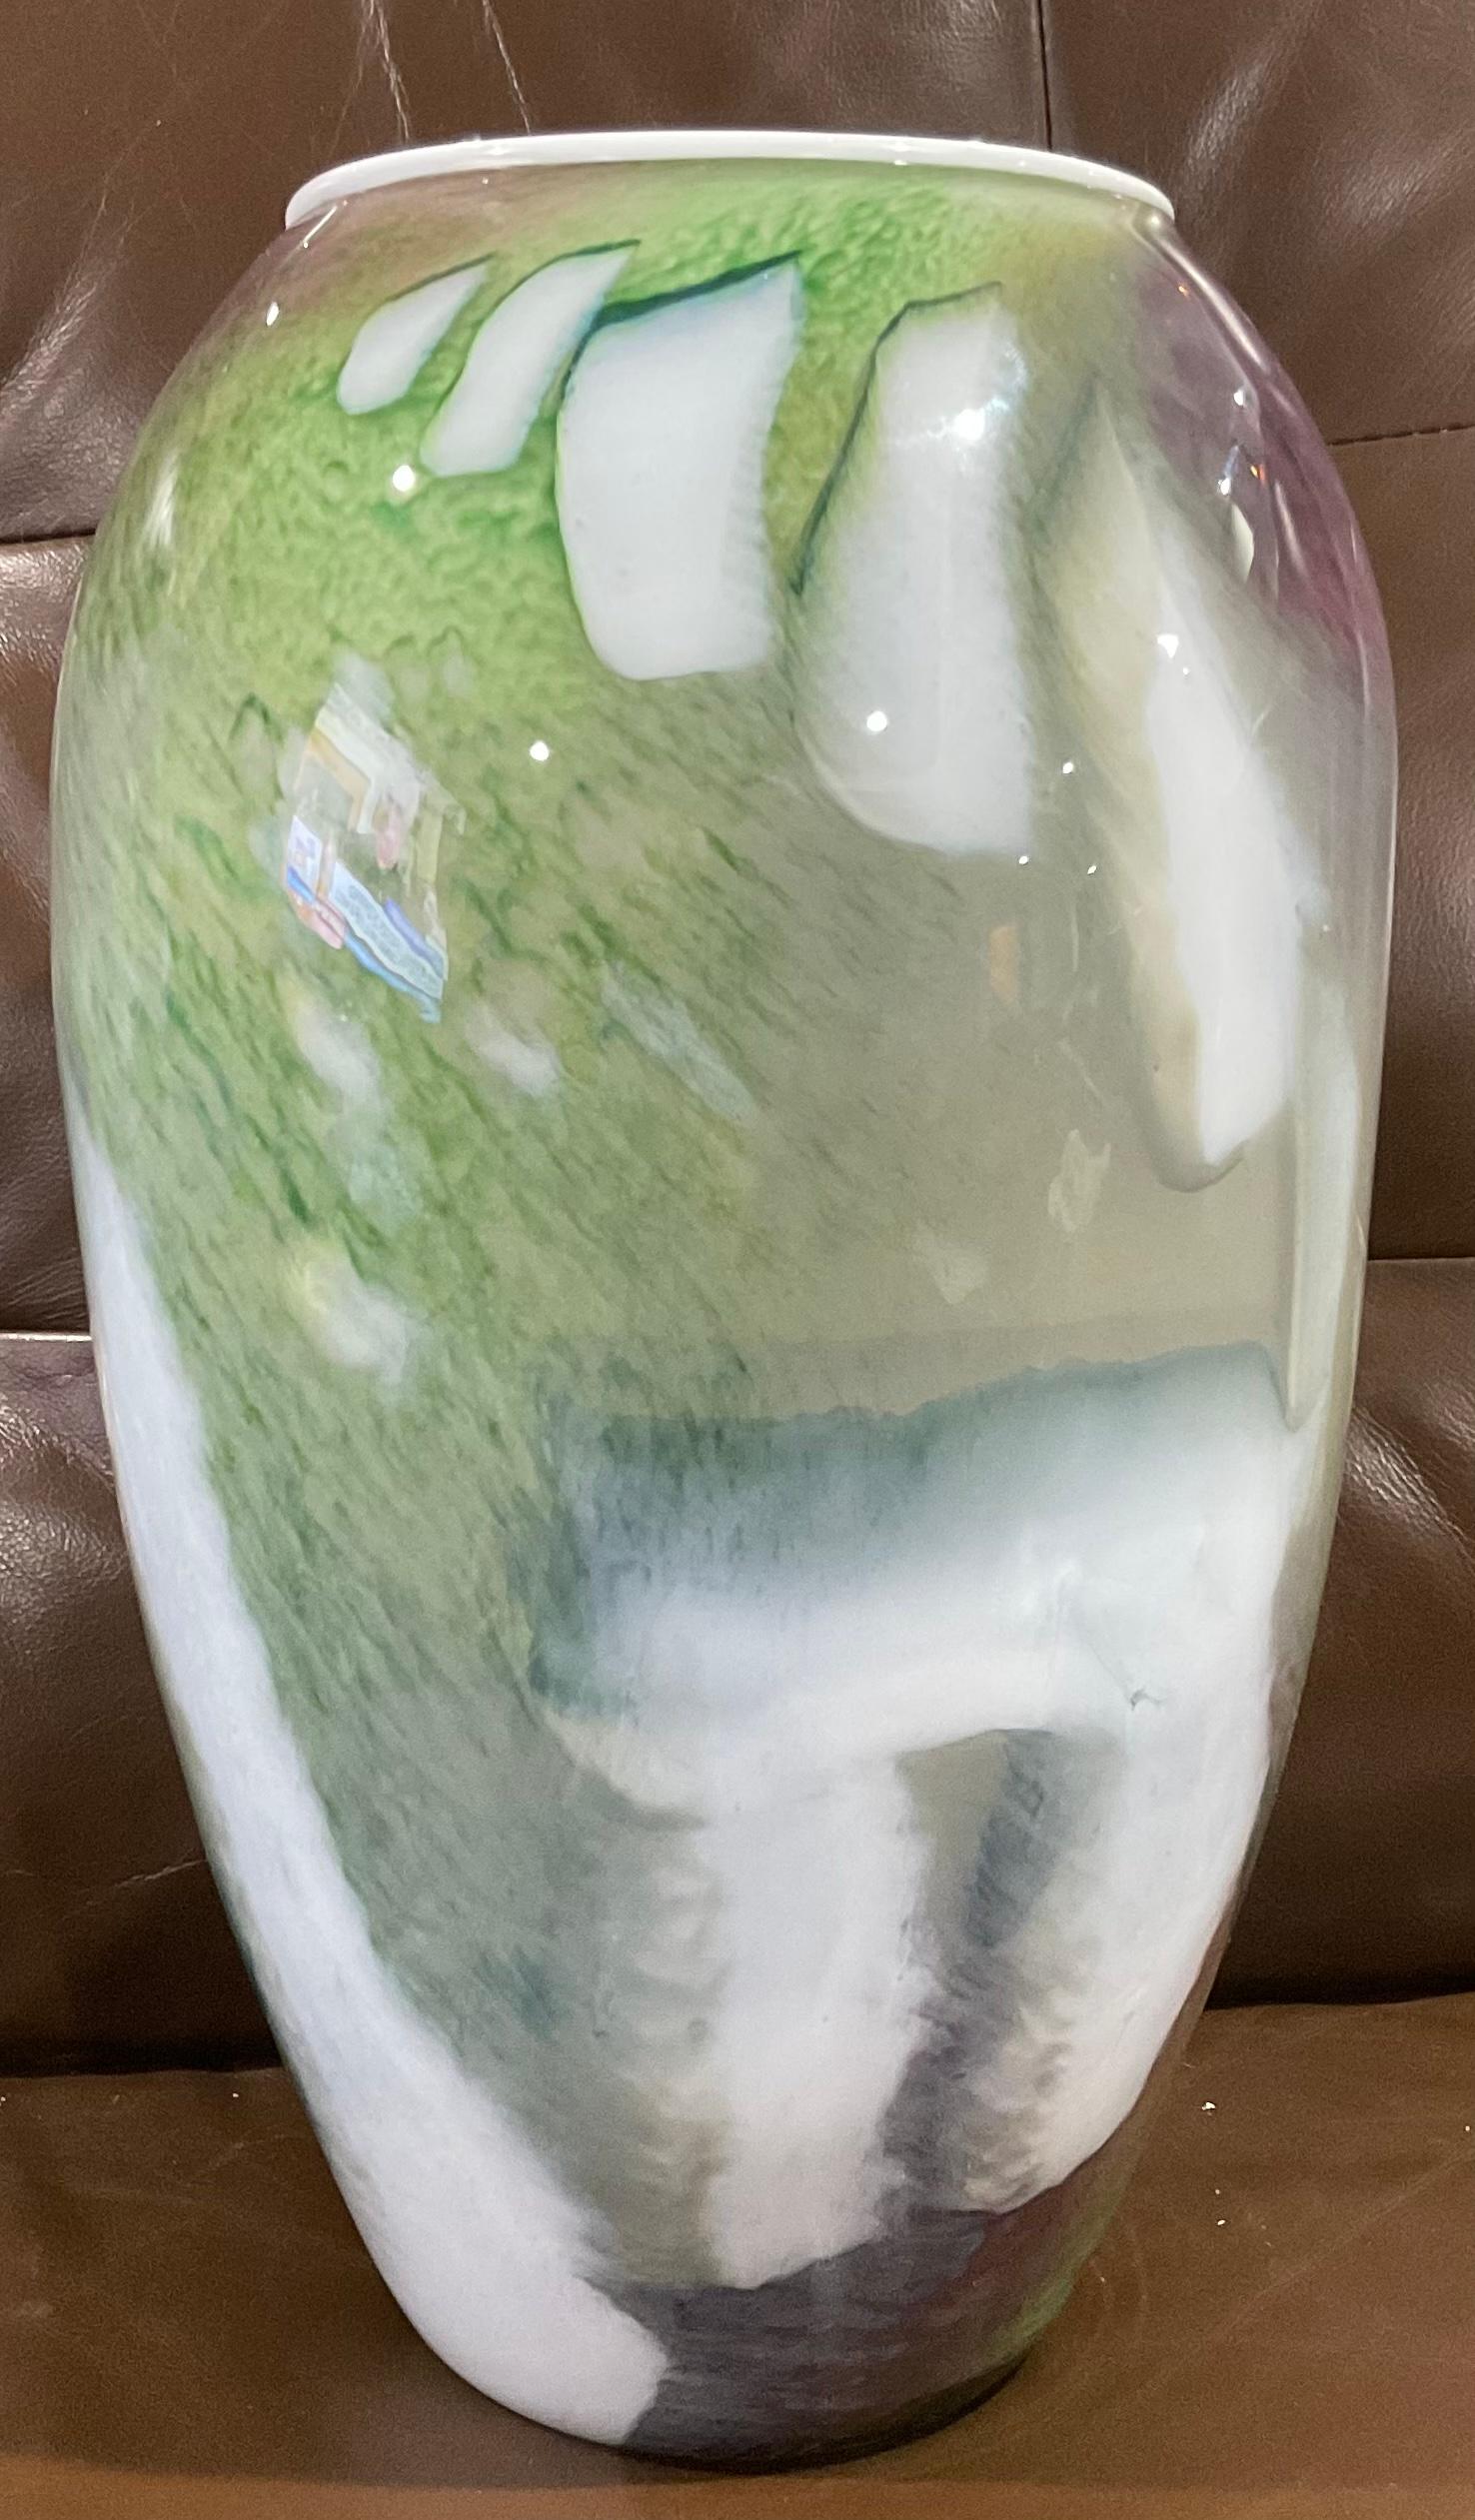 Amazing 2 sided extremely scenic hand blown studio art glass vase by world renowned artis William Morris. The vase is signed and dated 1985. 

William Morris was first introduced to glass at Pilchuck Glass School, Stanwood, Washington, where he